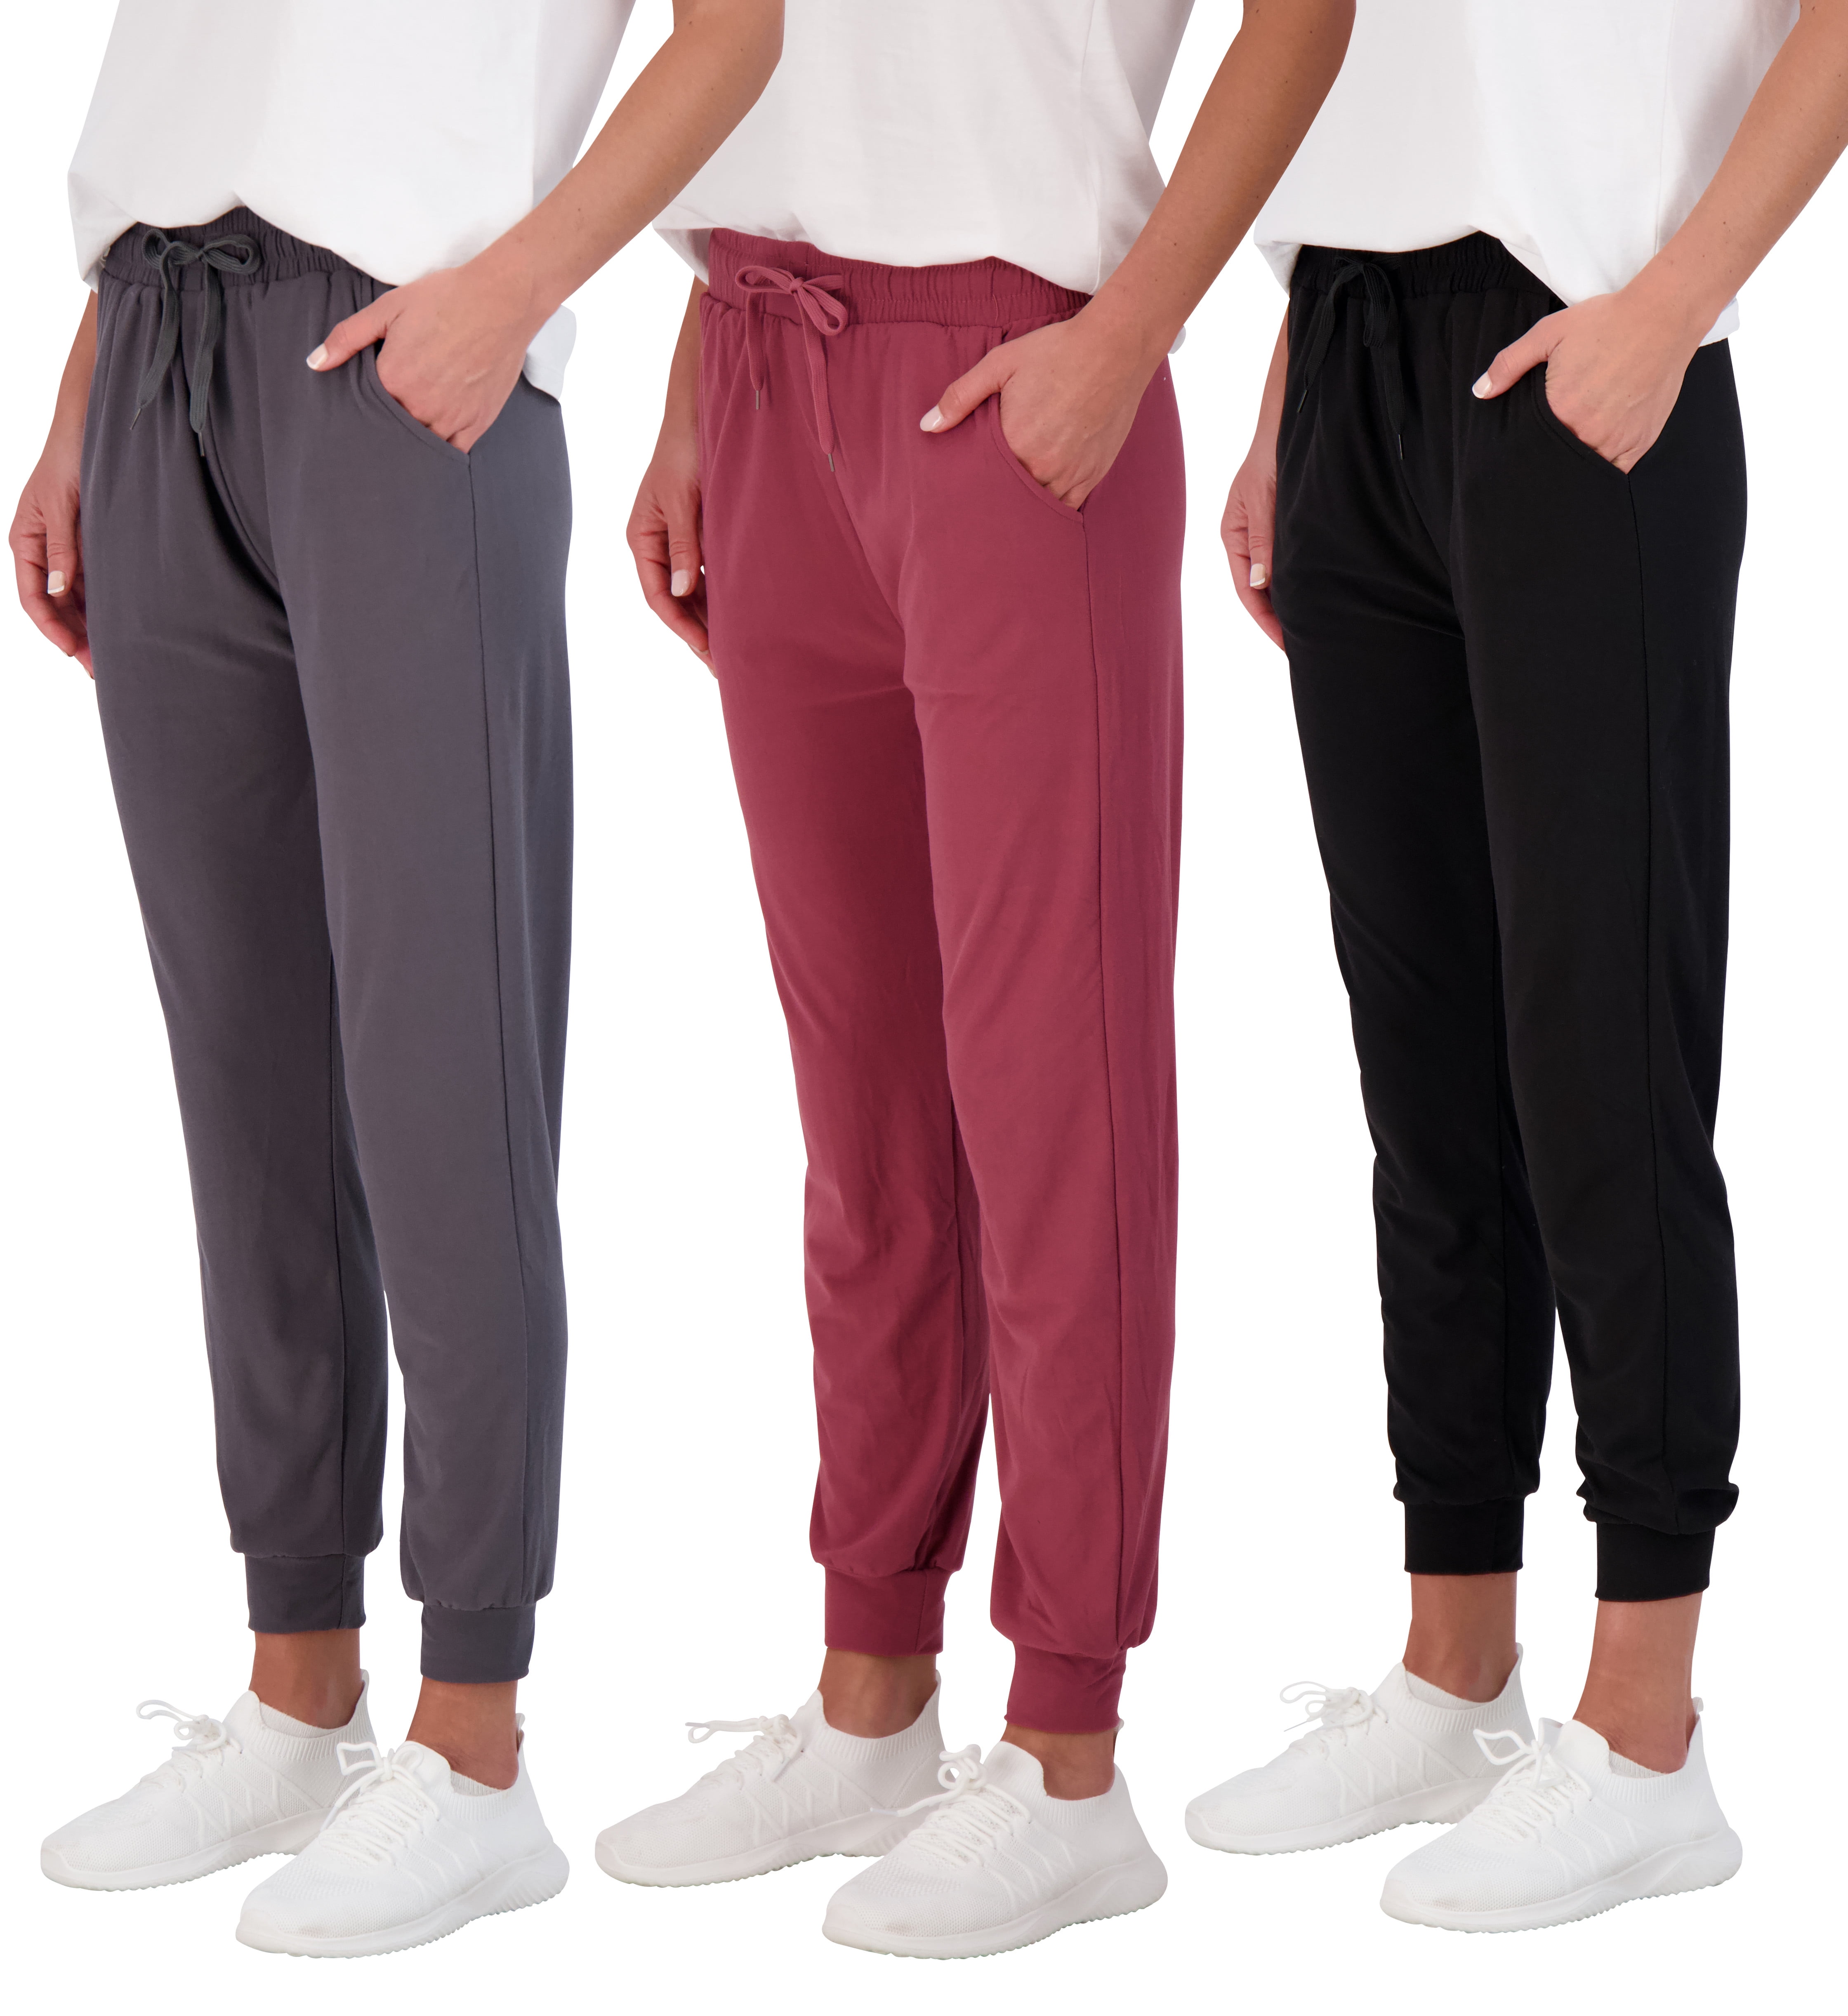 CAICJ98 Sweat Pants for Womens Womens Joggers with Side Pockets, Rib  Bottoms, Soft Sweatpants for Women Dark Gray,M